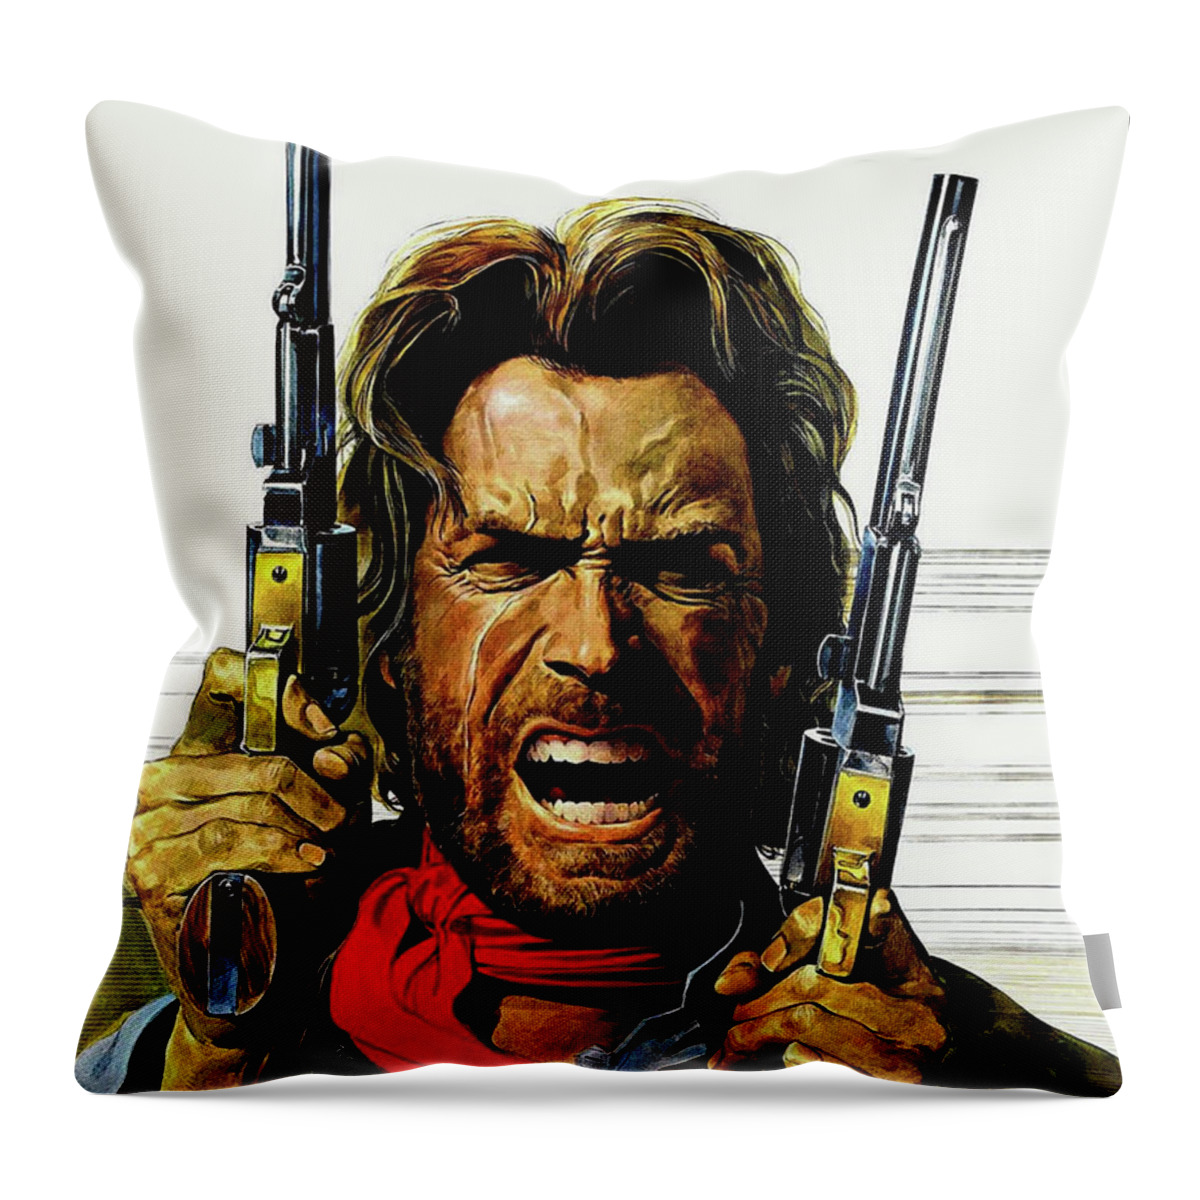 Clint Eastwood As Josey Wales Throw Pillow featuring the mixed media Clint Eastwood As Josey Wales by David Dehner